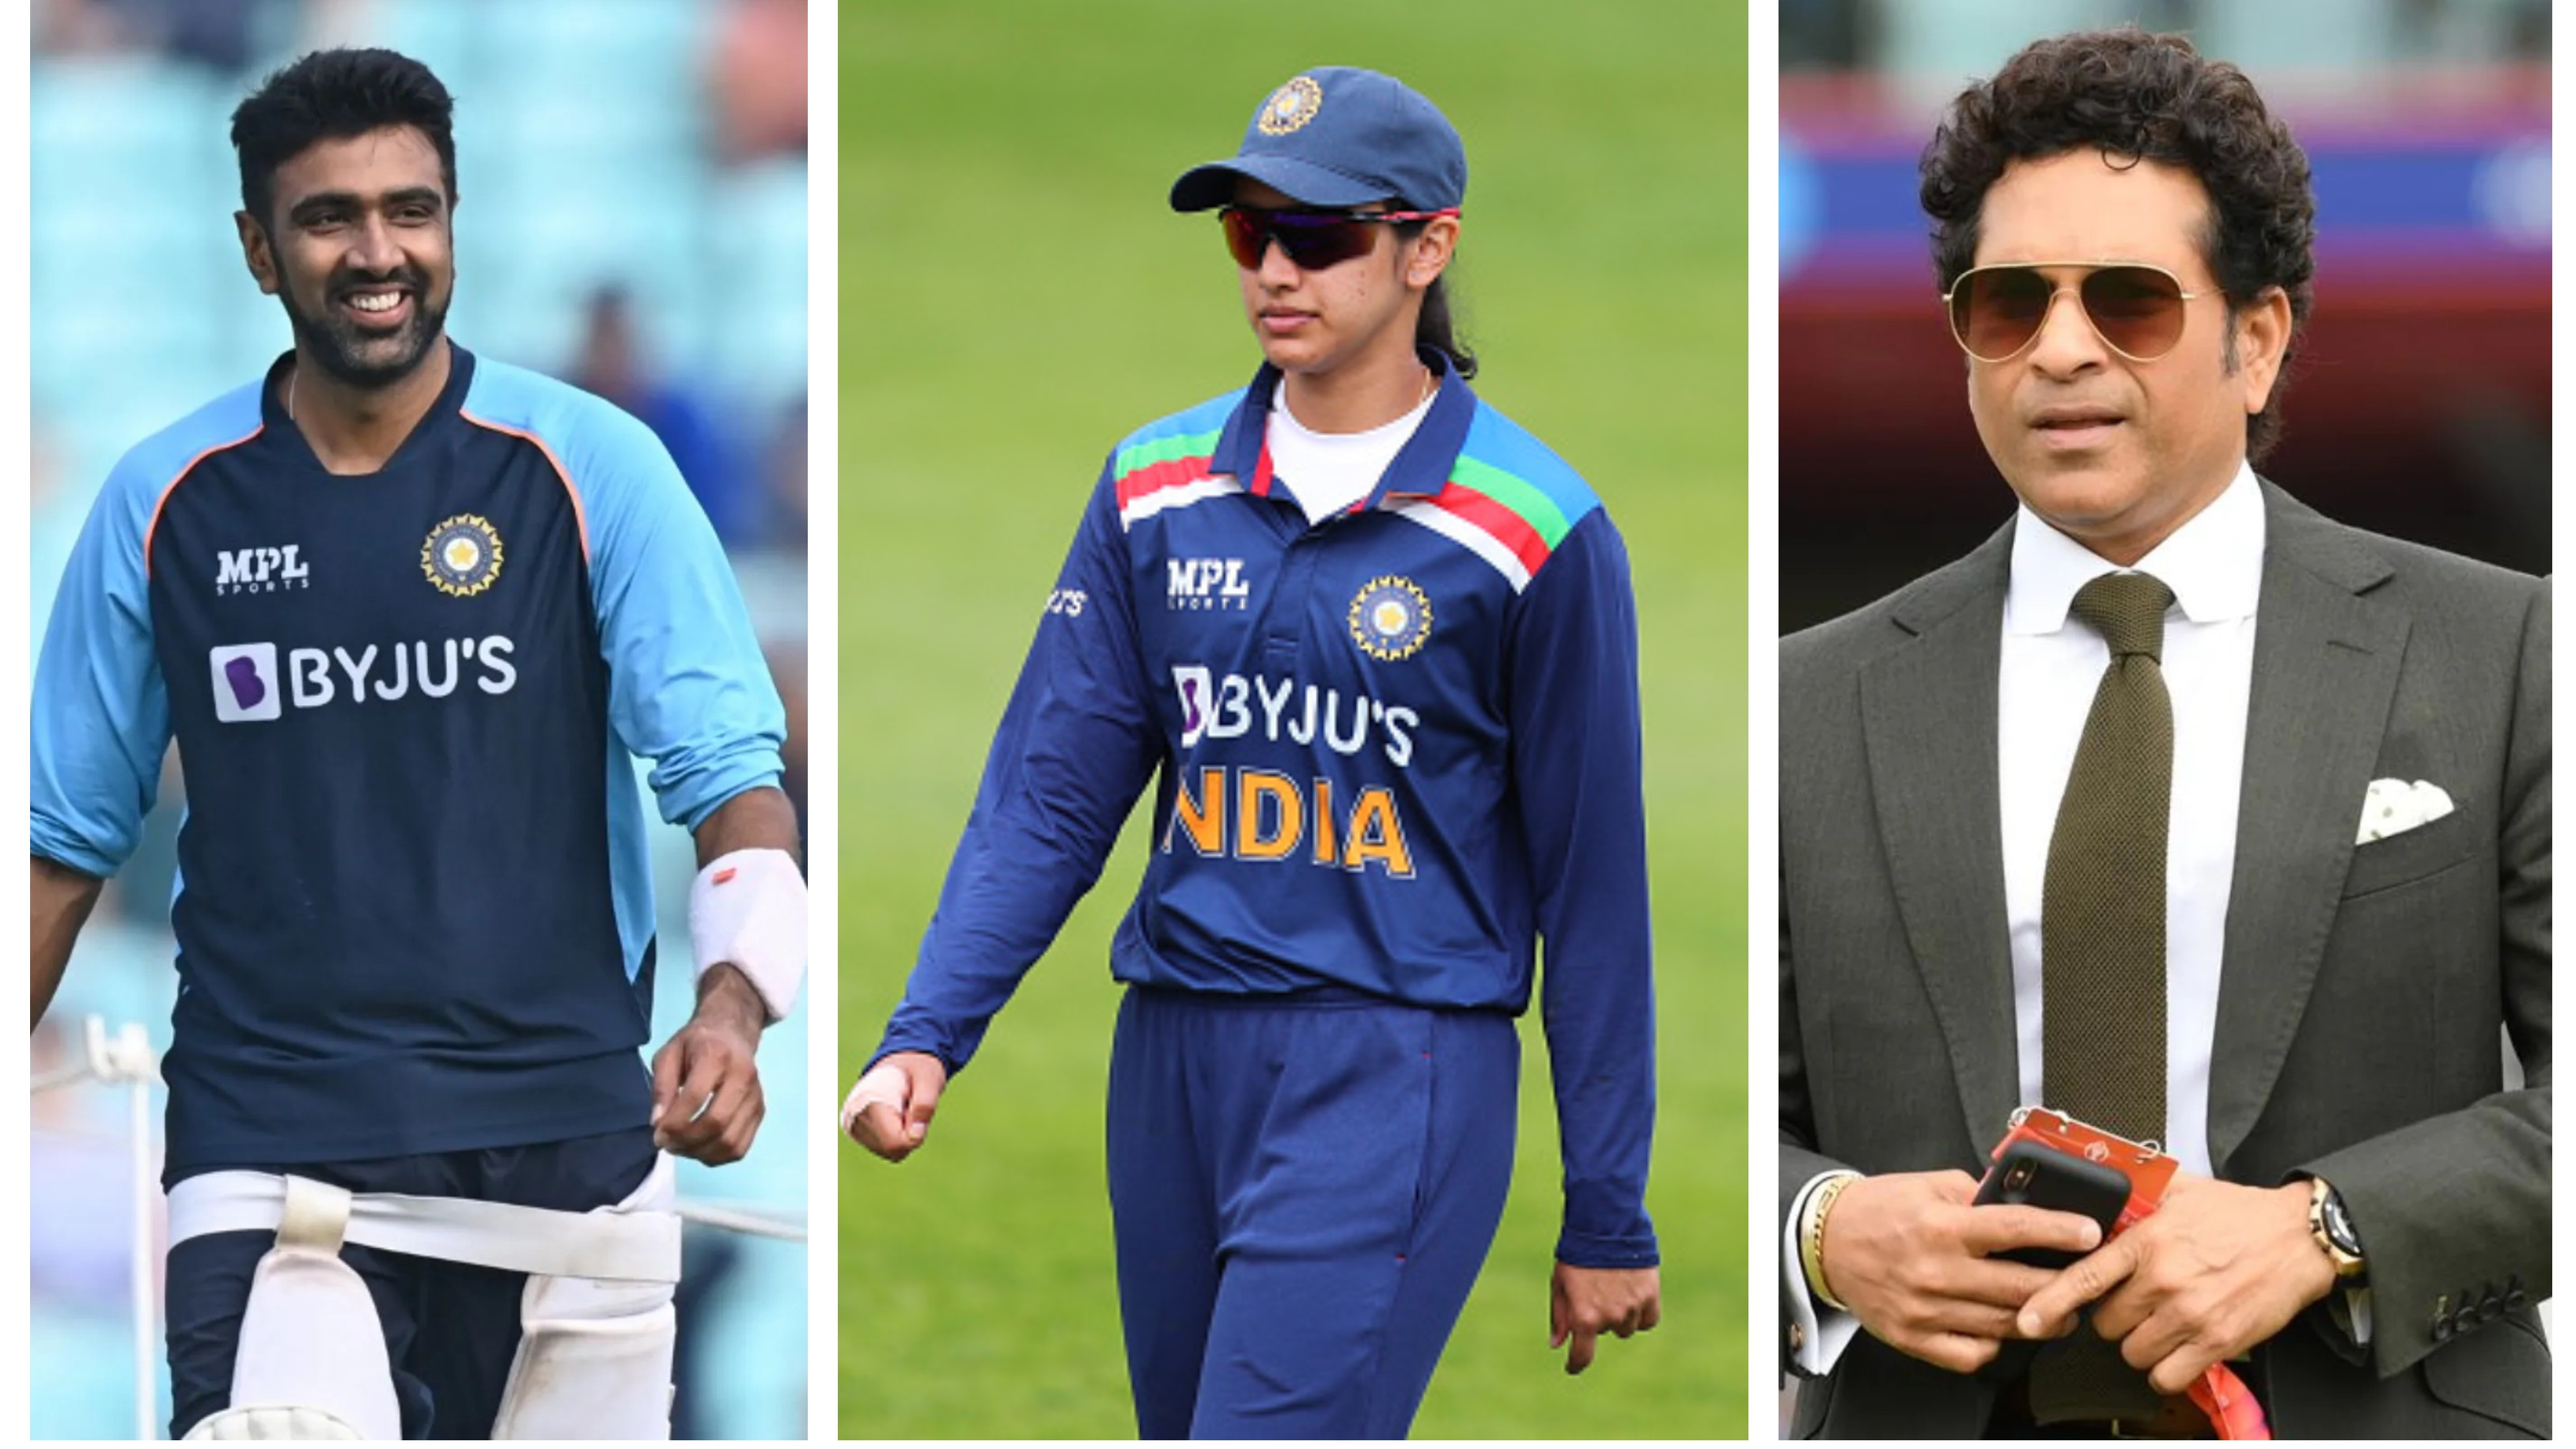 Indian cricket fraternity reacts as Smriti Mandhana bags ICC Women’s Cricketer of the Year award